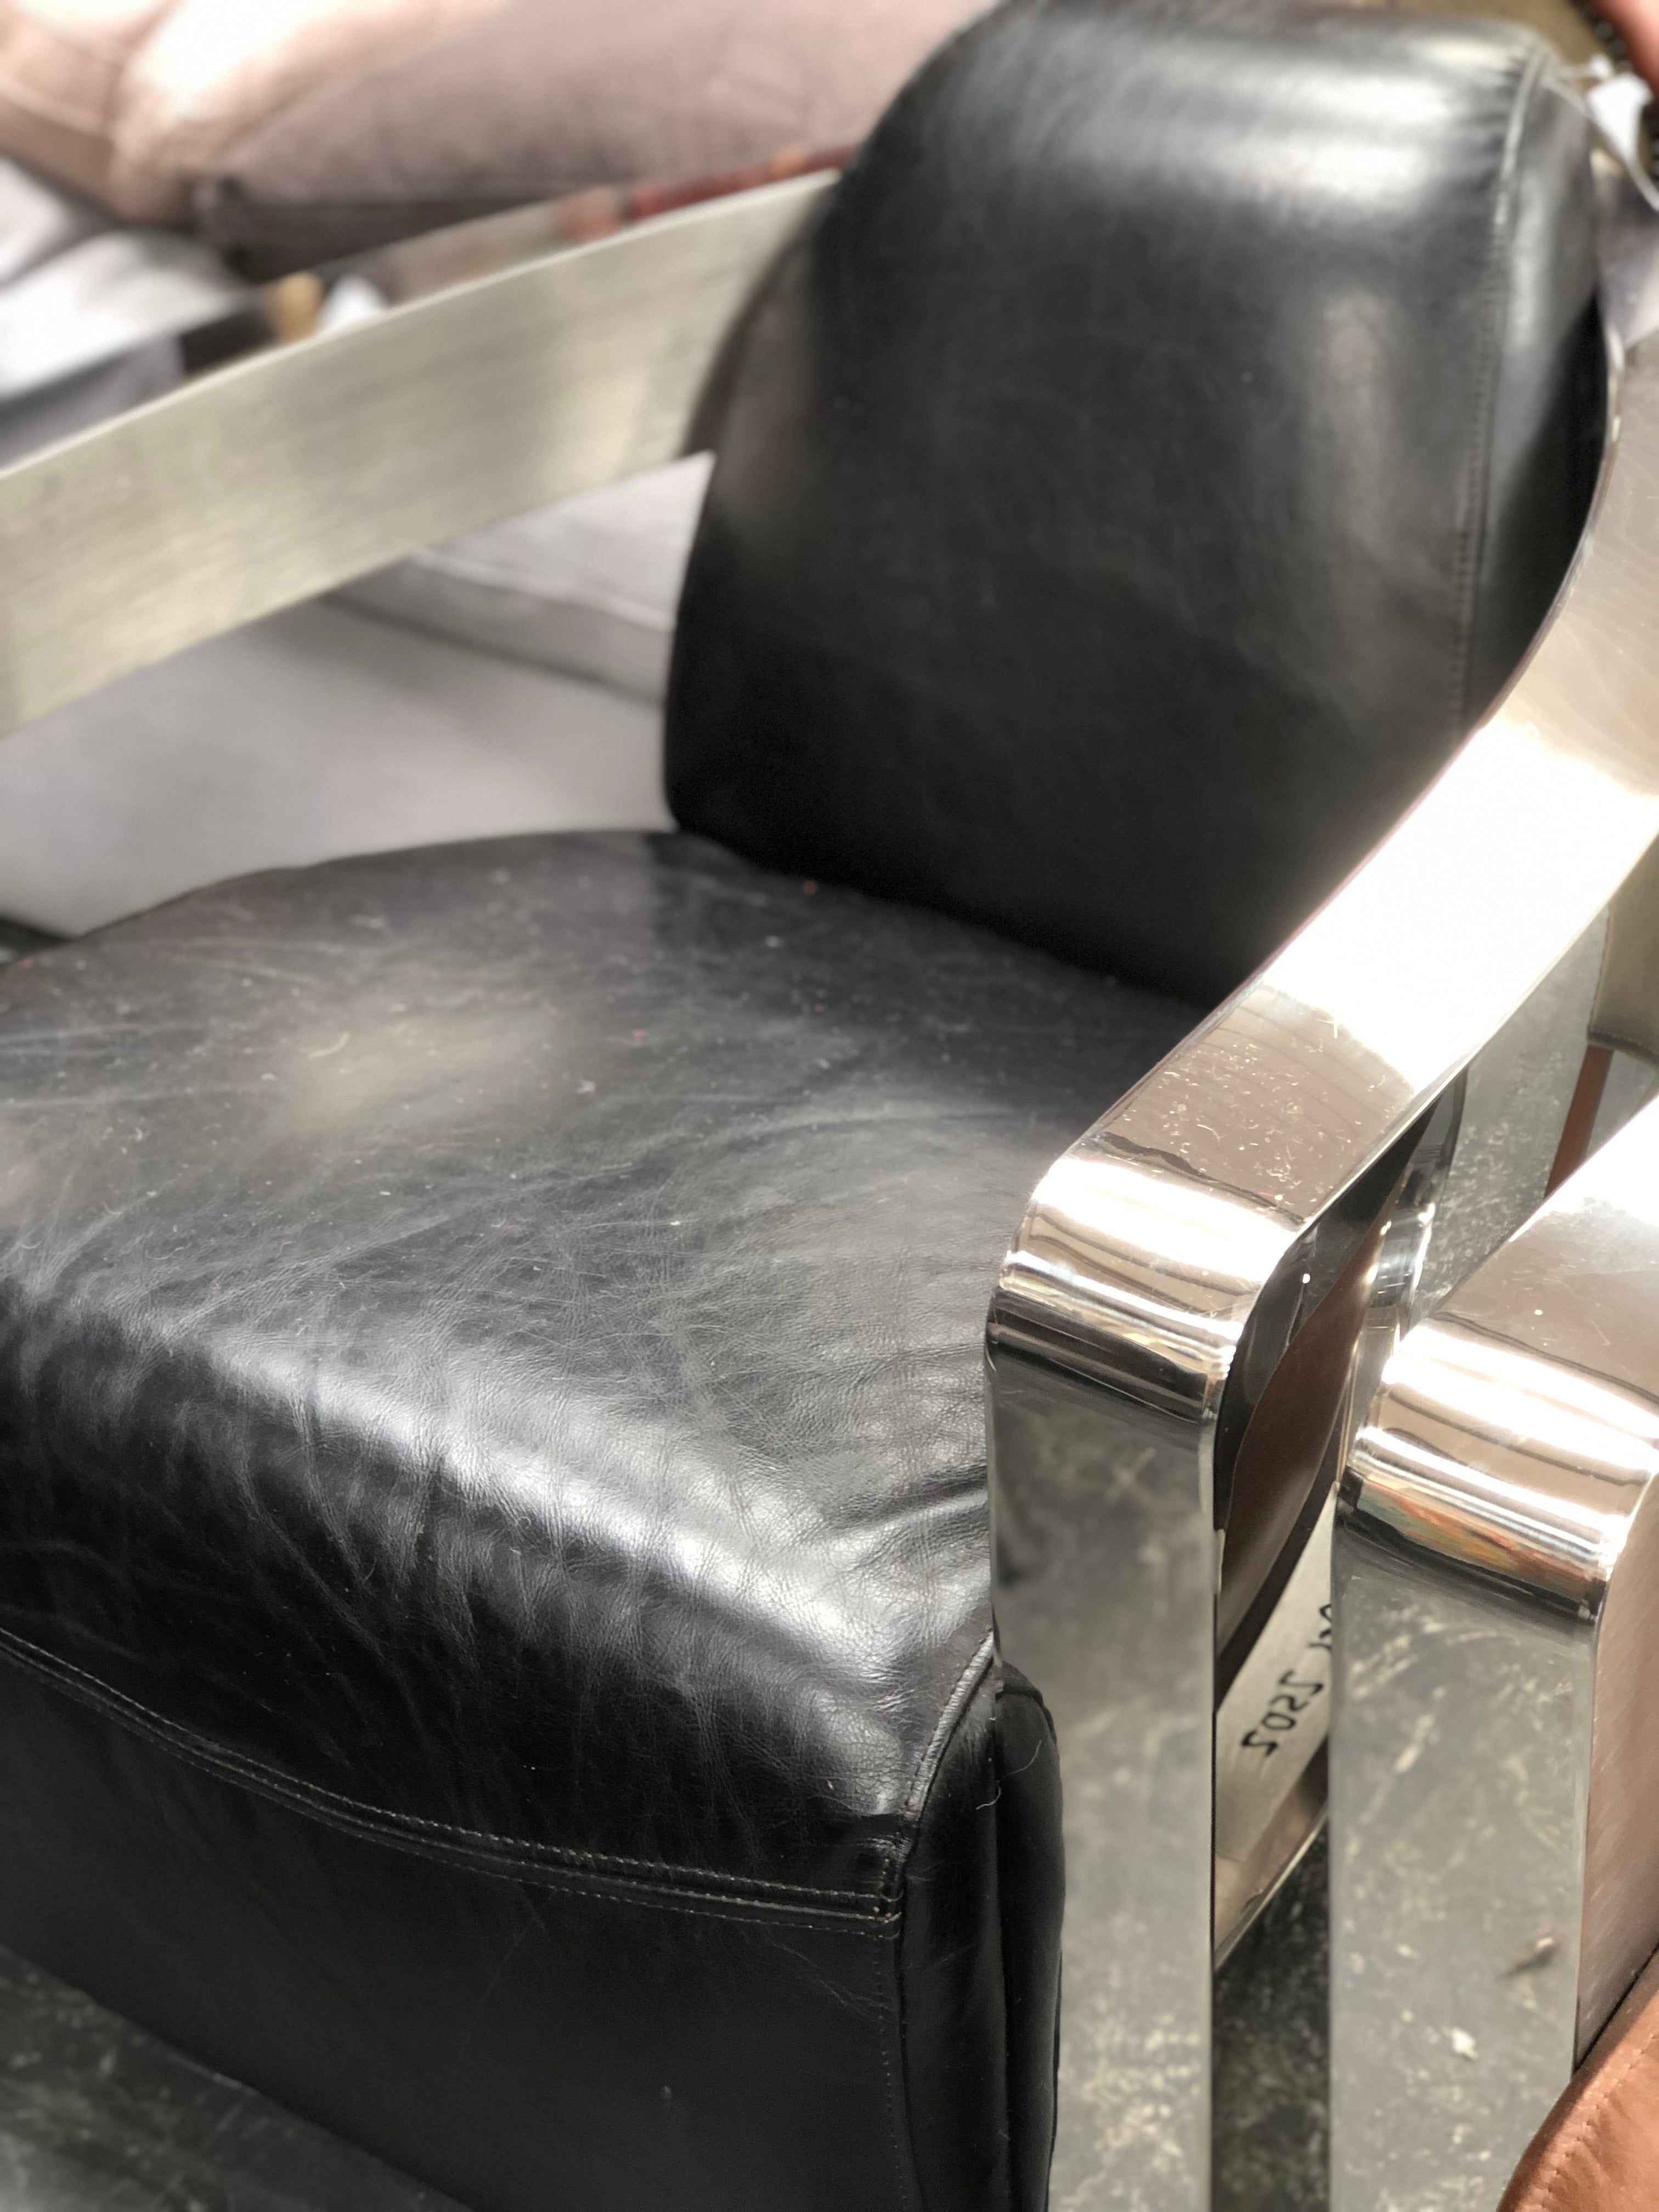 Halo Mars leather Chair from Top Secret Furniture